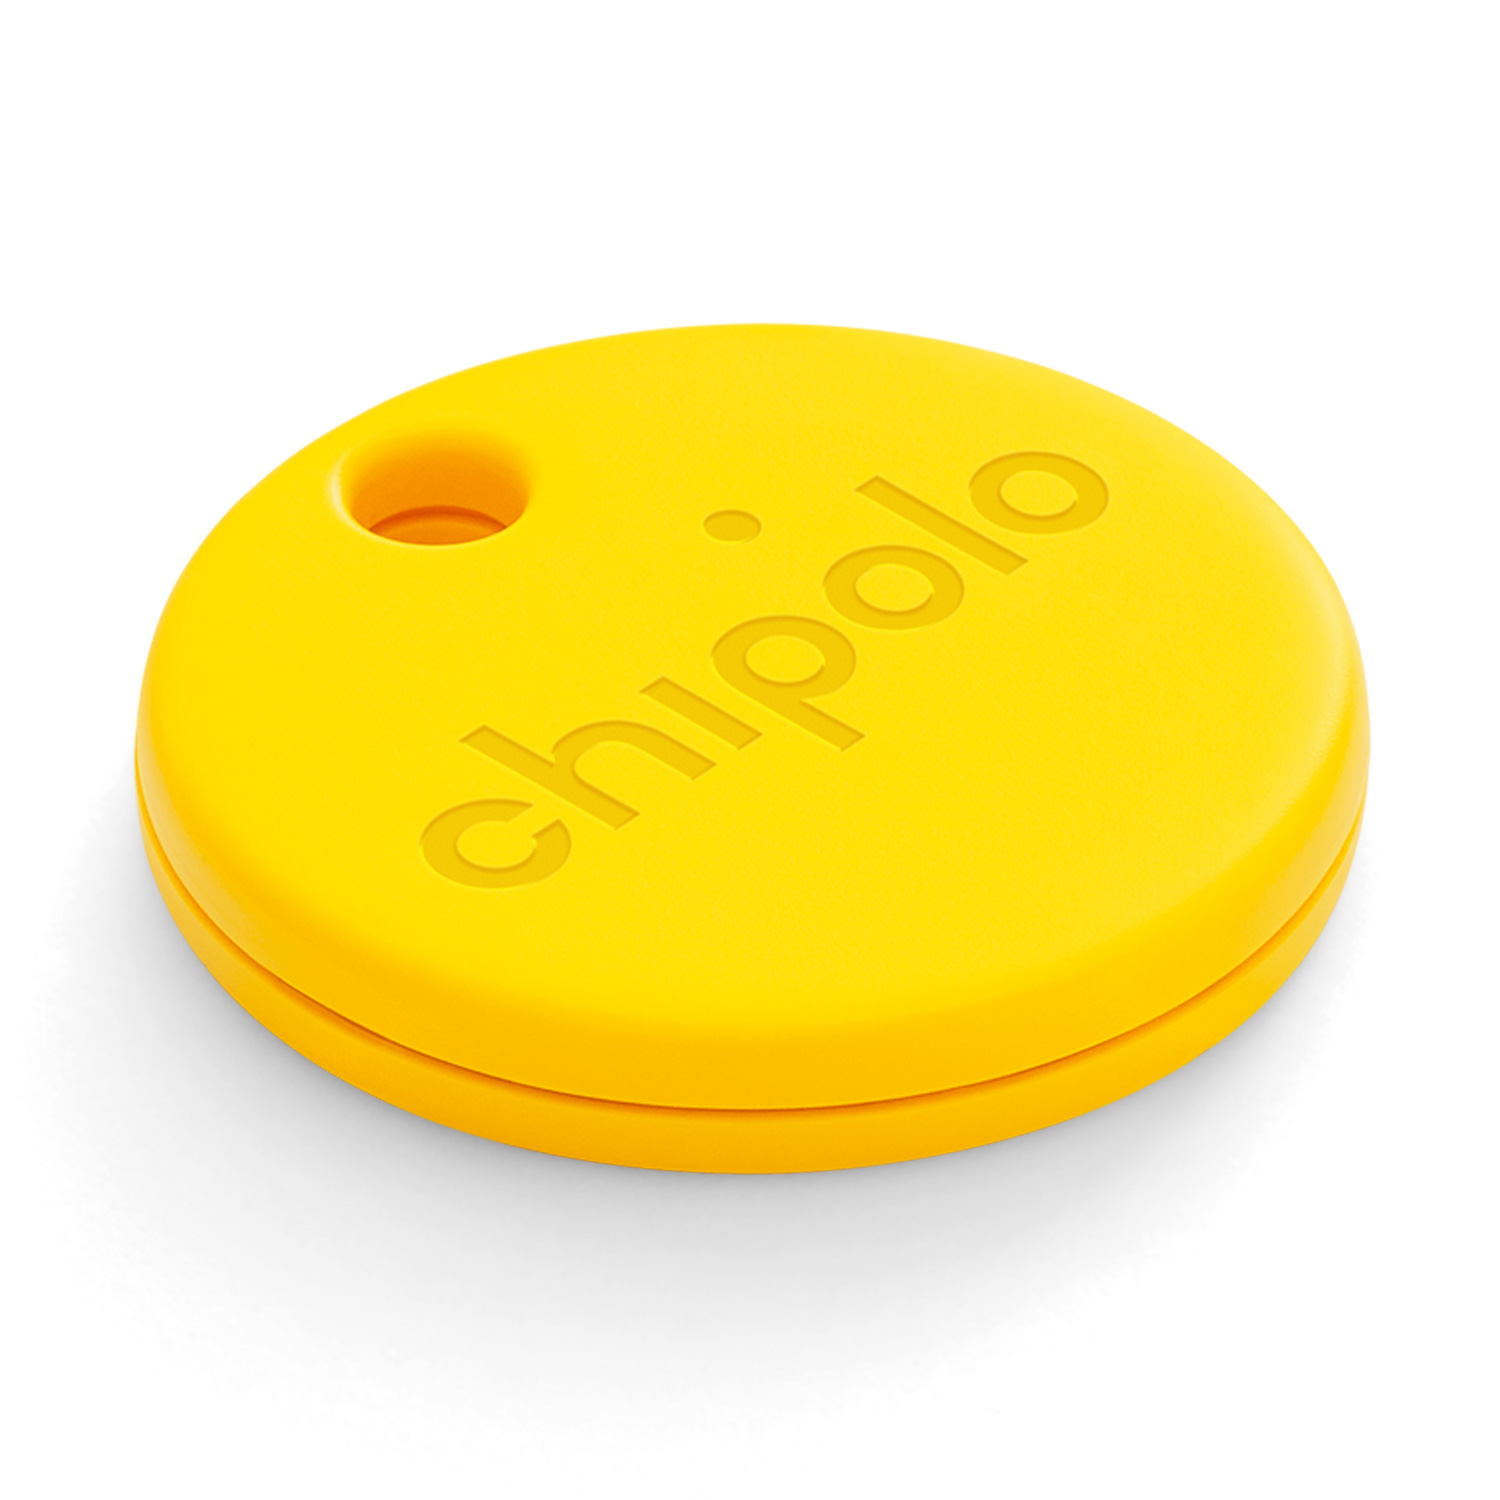 Chipolo ONE - Bluetooth tracker - yellow